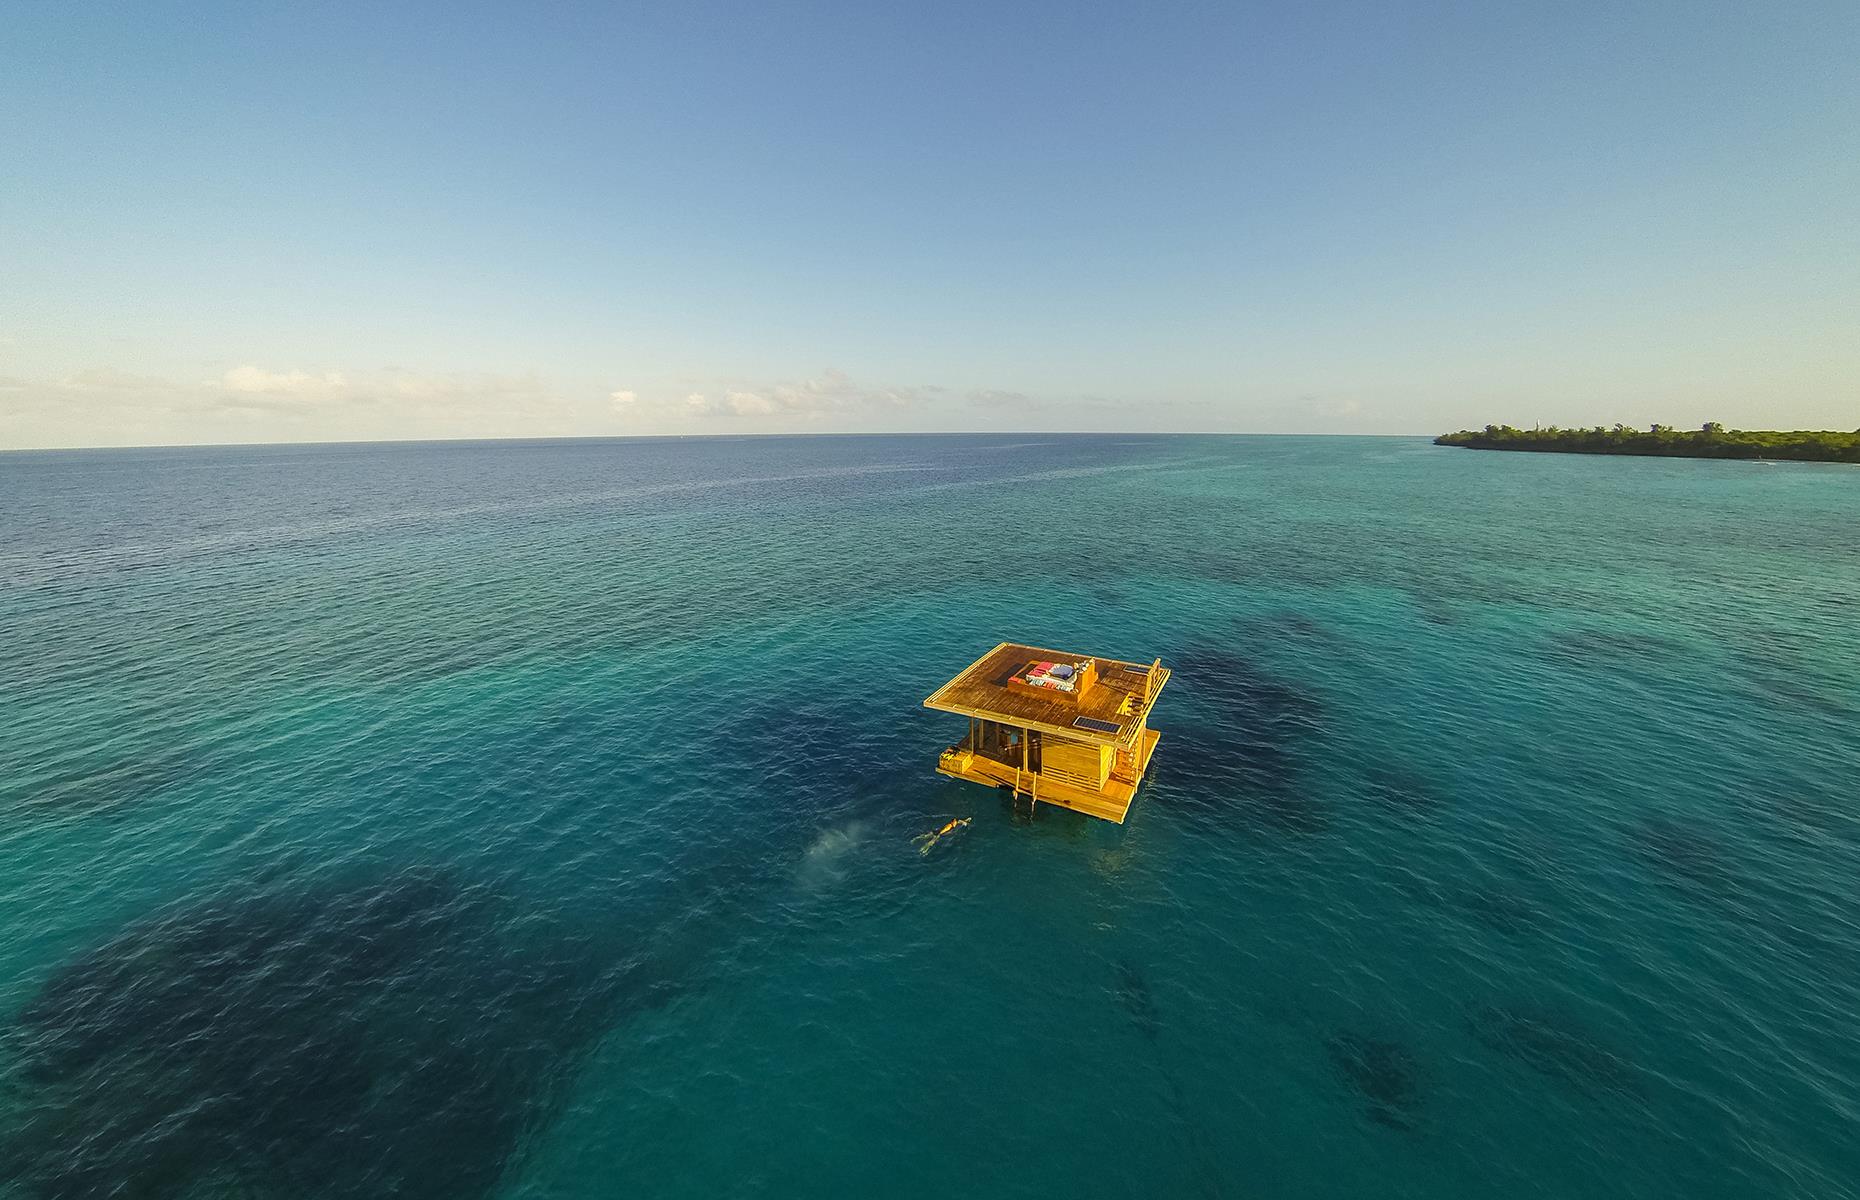 <p>Taking floating hotels to the extreme is <a href="https://themantaresort.com">Manta Resort</a> off the coast of Pemba Island in Tanzania. Because overwater villas simply aren't enough for it, the resort has also got an incredible 'in-water' villa, which is quite literally stranded out to sea. The villa has three floors, one of which is underwater. </p>